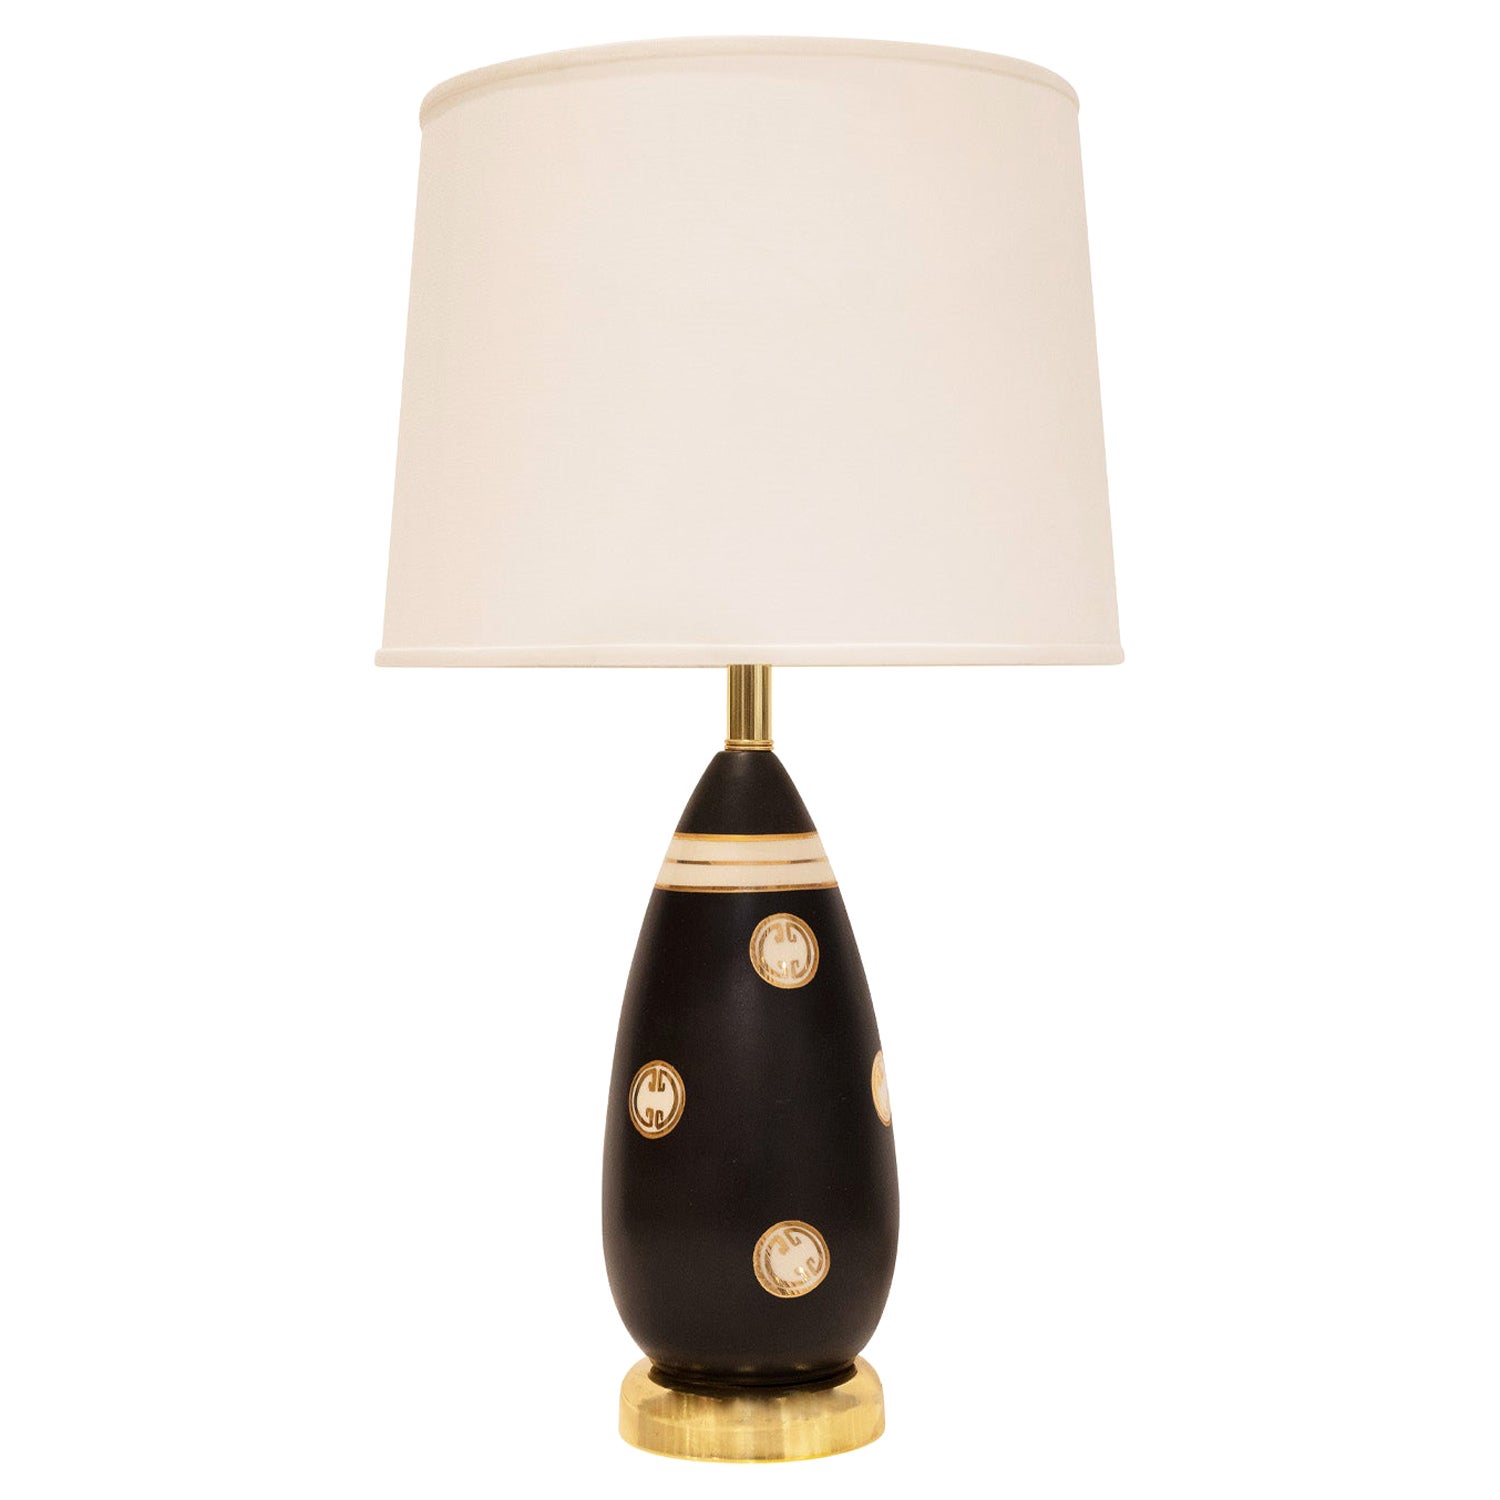 Chic Artisan Porcelain Table Lamp with Gold Medallions, 1960s